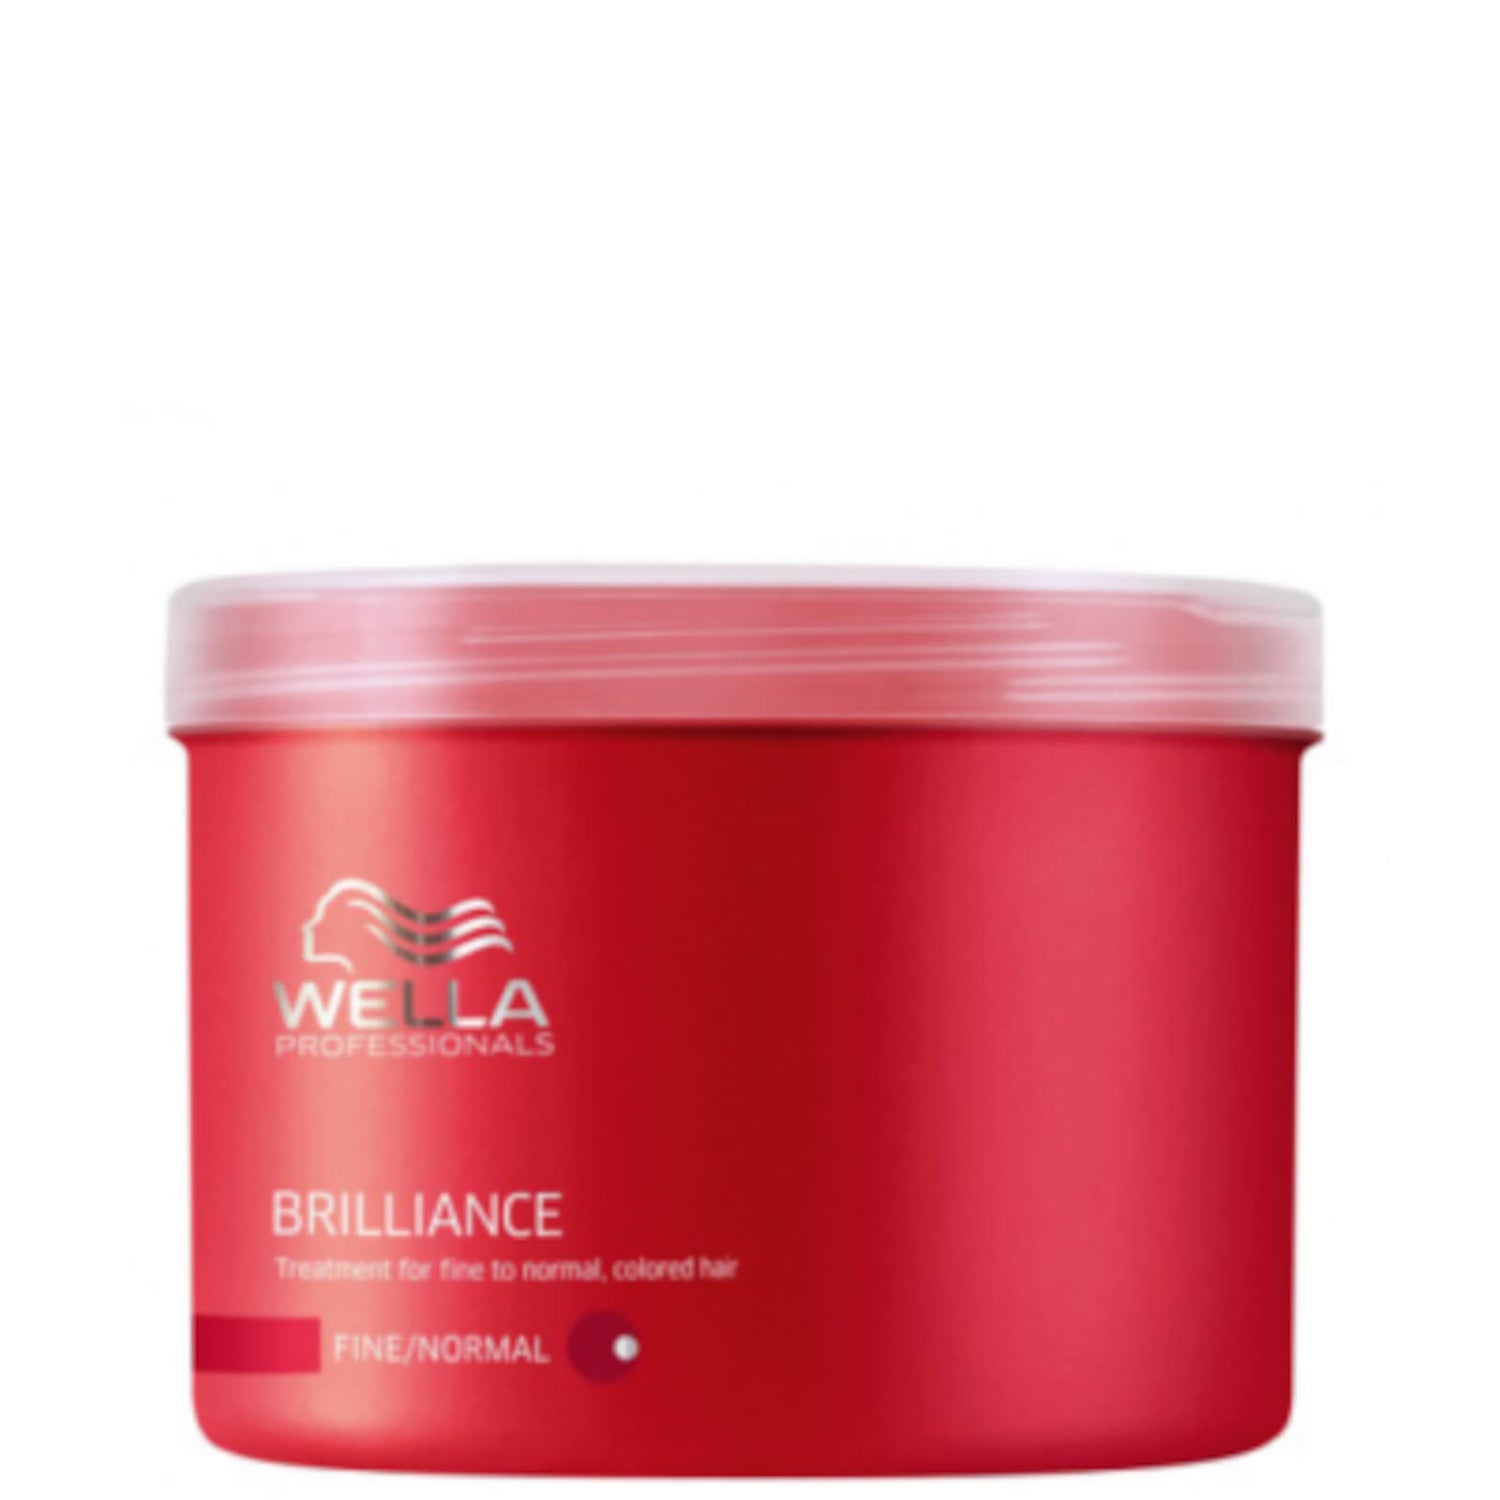 Wella Professionals Brilliance Treatment For Fine To Normal, Coloured Hair（500 毫升）